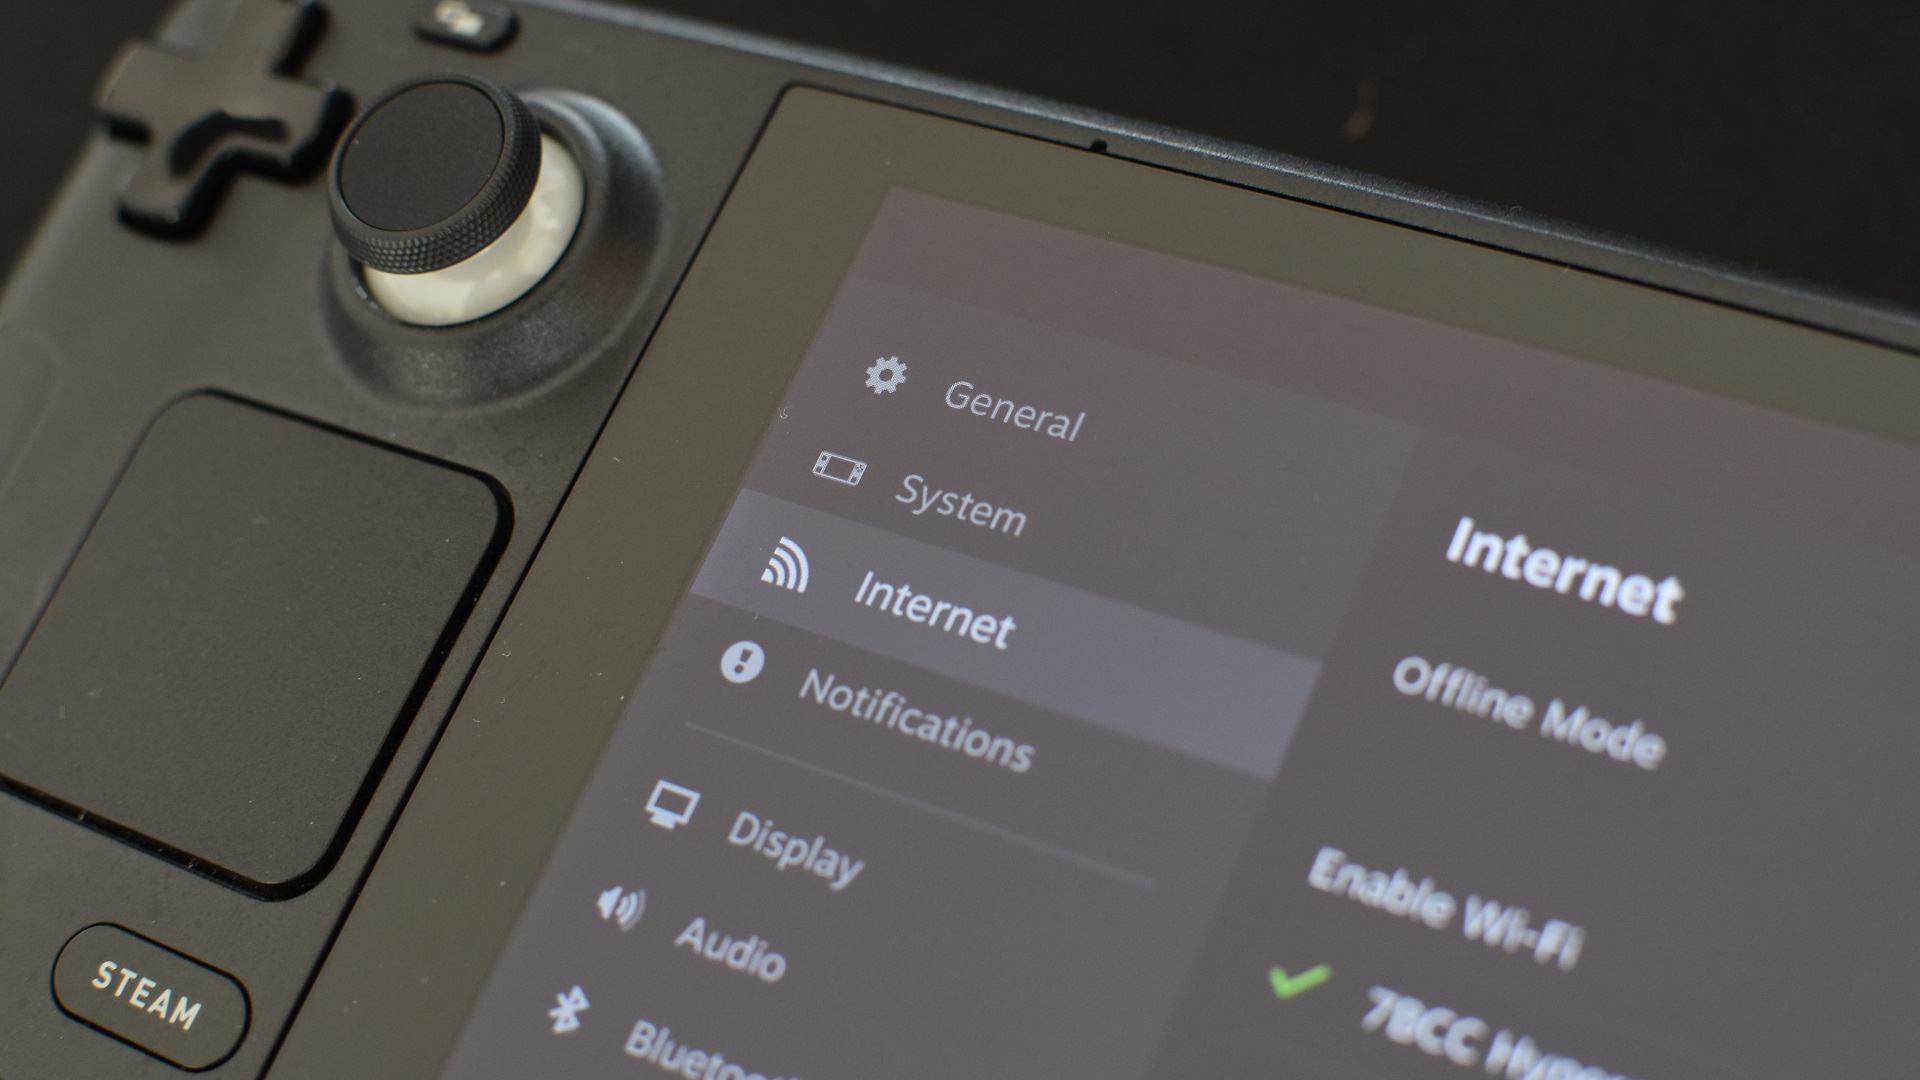 Step 1 of how to use Steam Remote Play on the Steam Deck: Make sure both the Steam Deck and PC are connected to the internet, and are logged into the same Steam account.